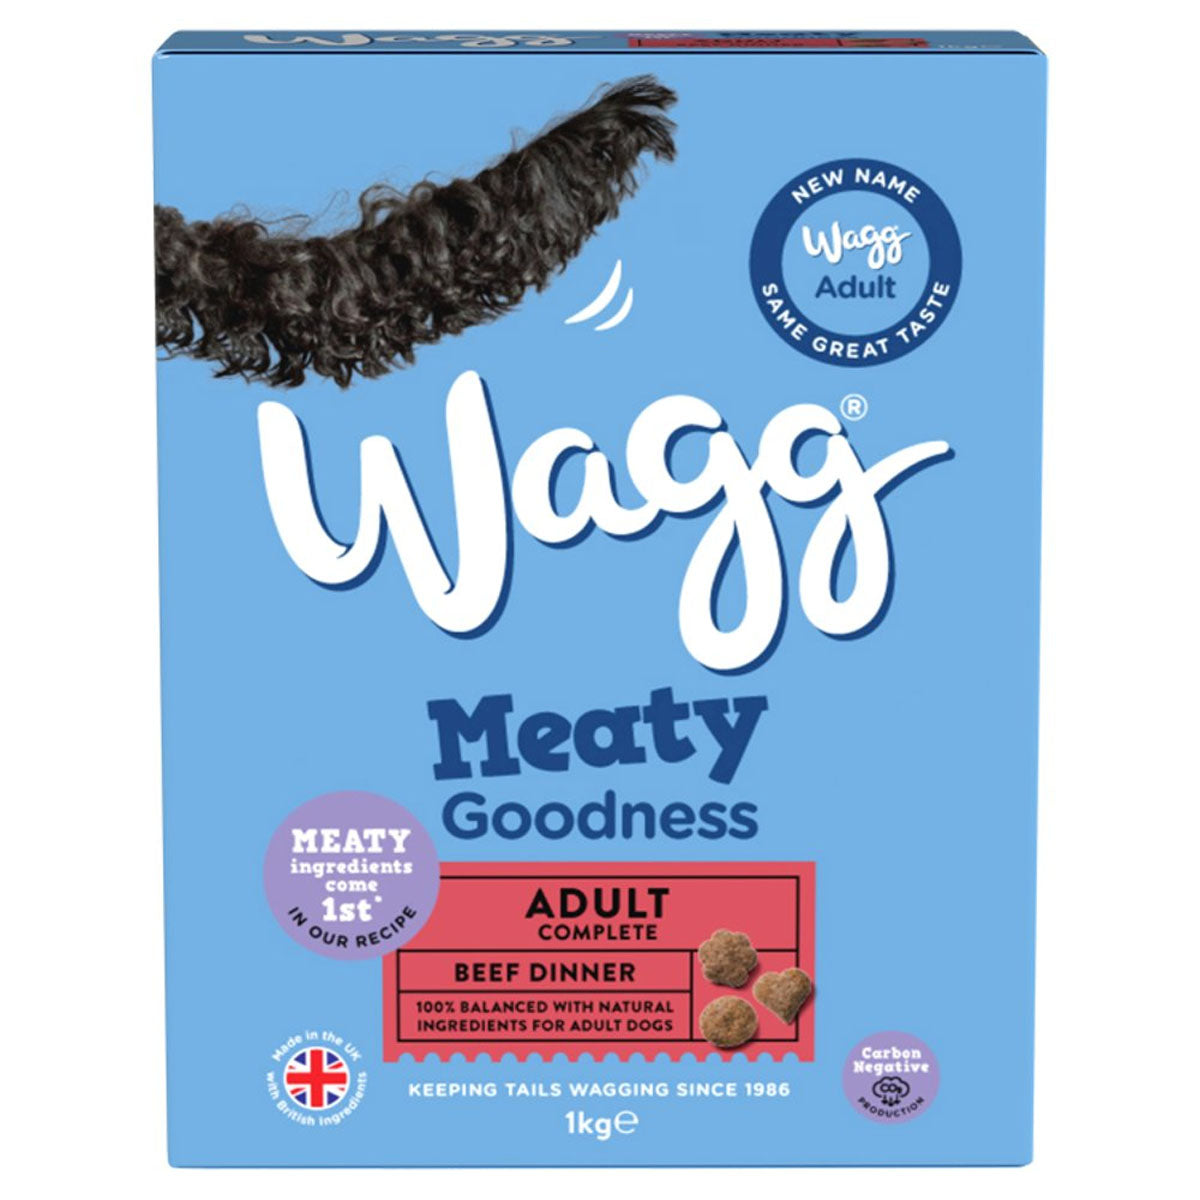 Wagg - Meaty Goodness Adult Complete Beef Dinner - 1kg dog biscuits.